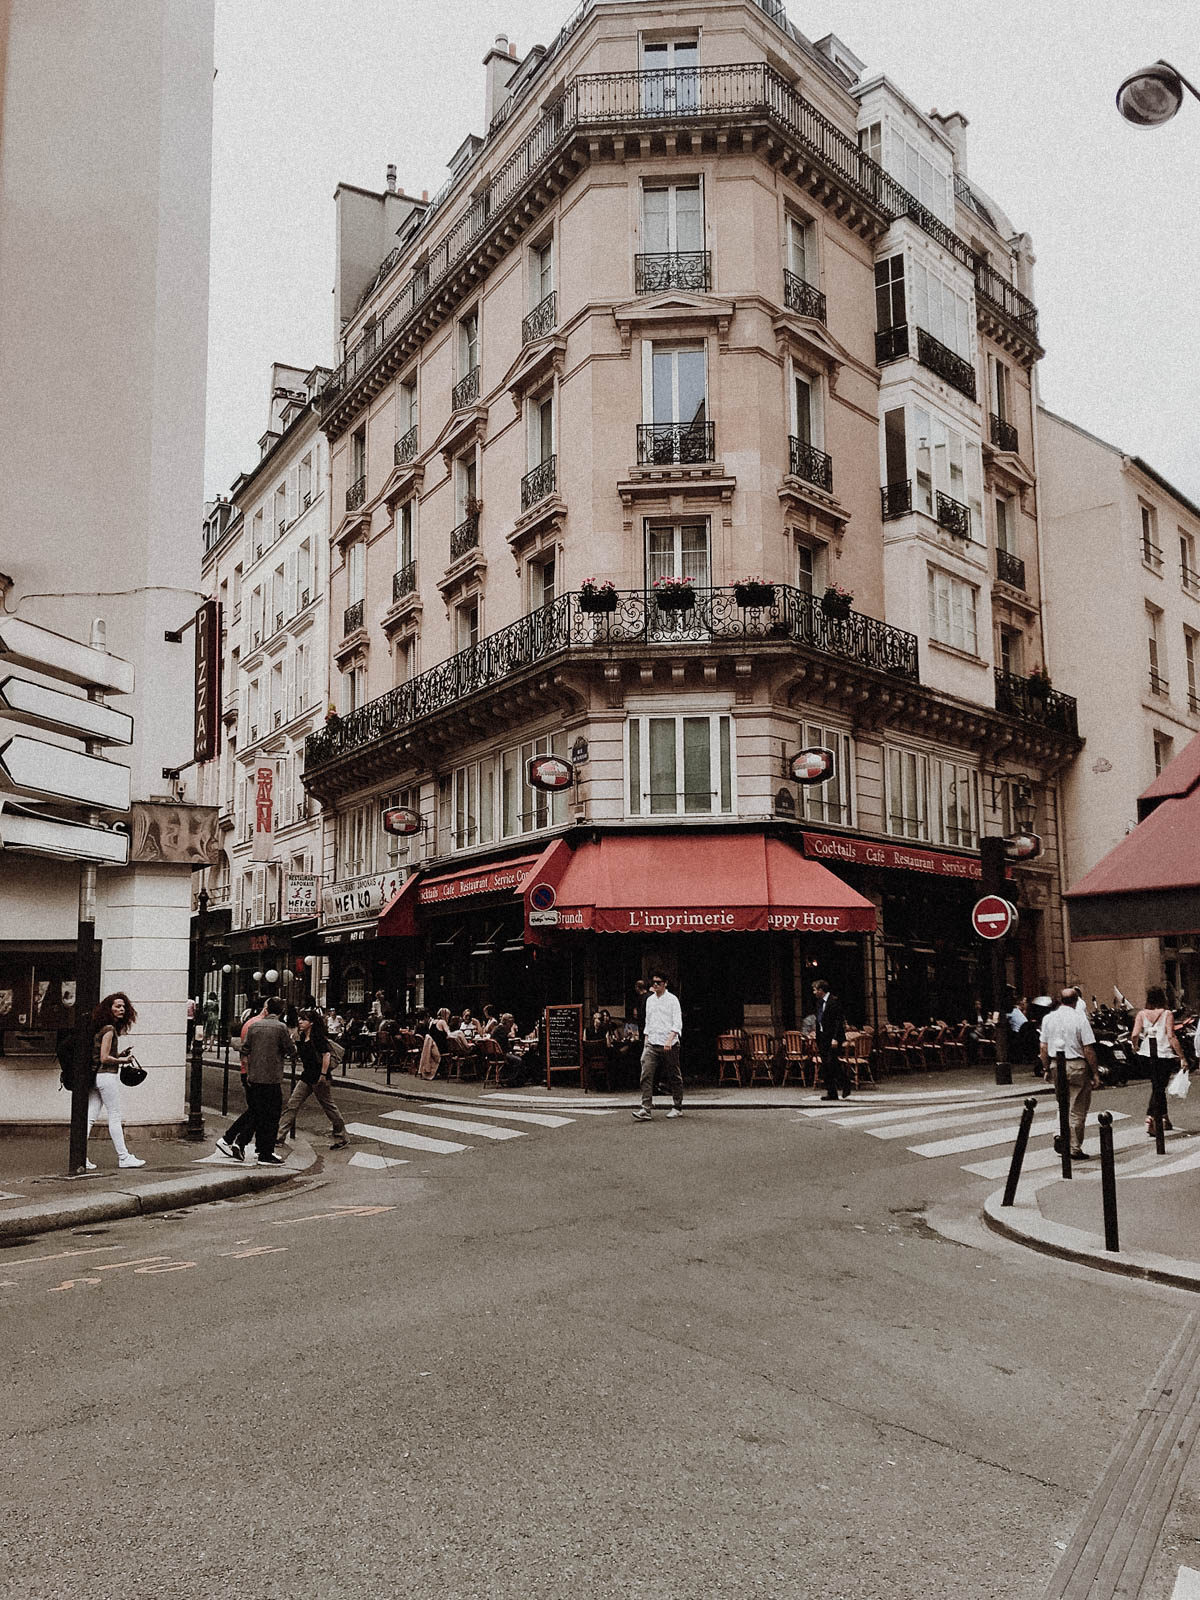 Paris France Travel Guide - Cafe Street, European Architecture and Buildings / RG Daily Blog